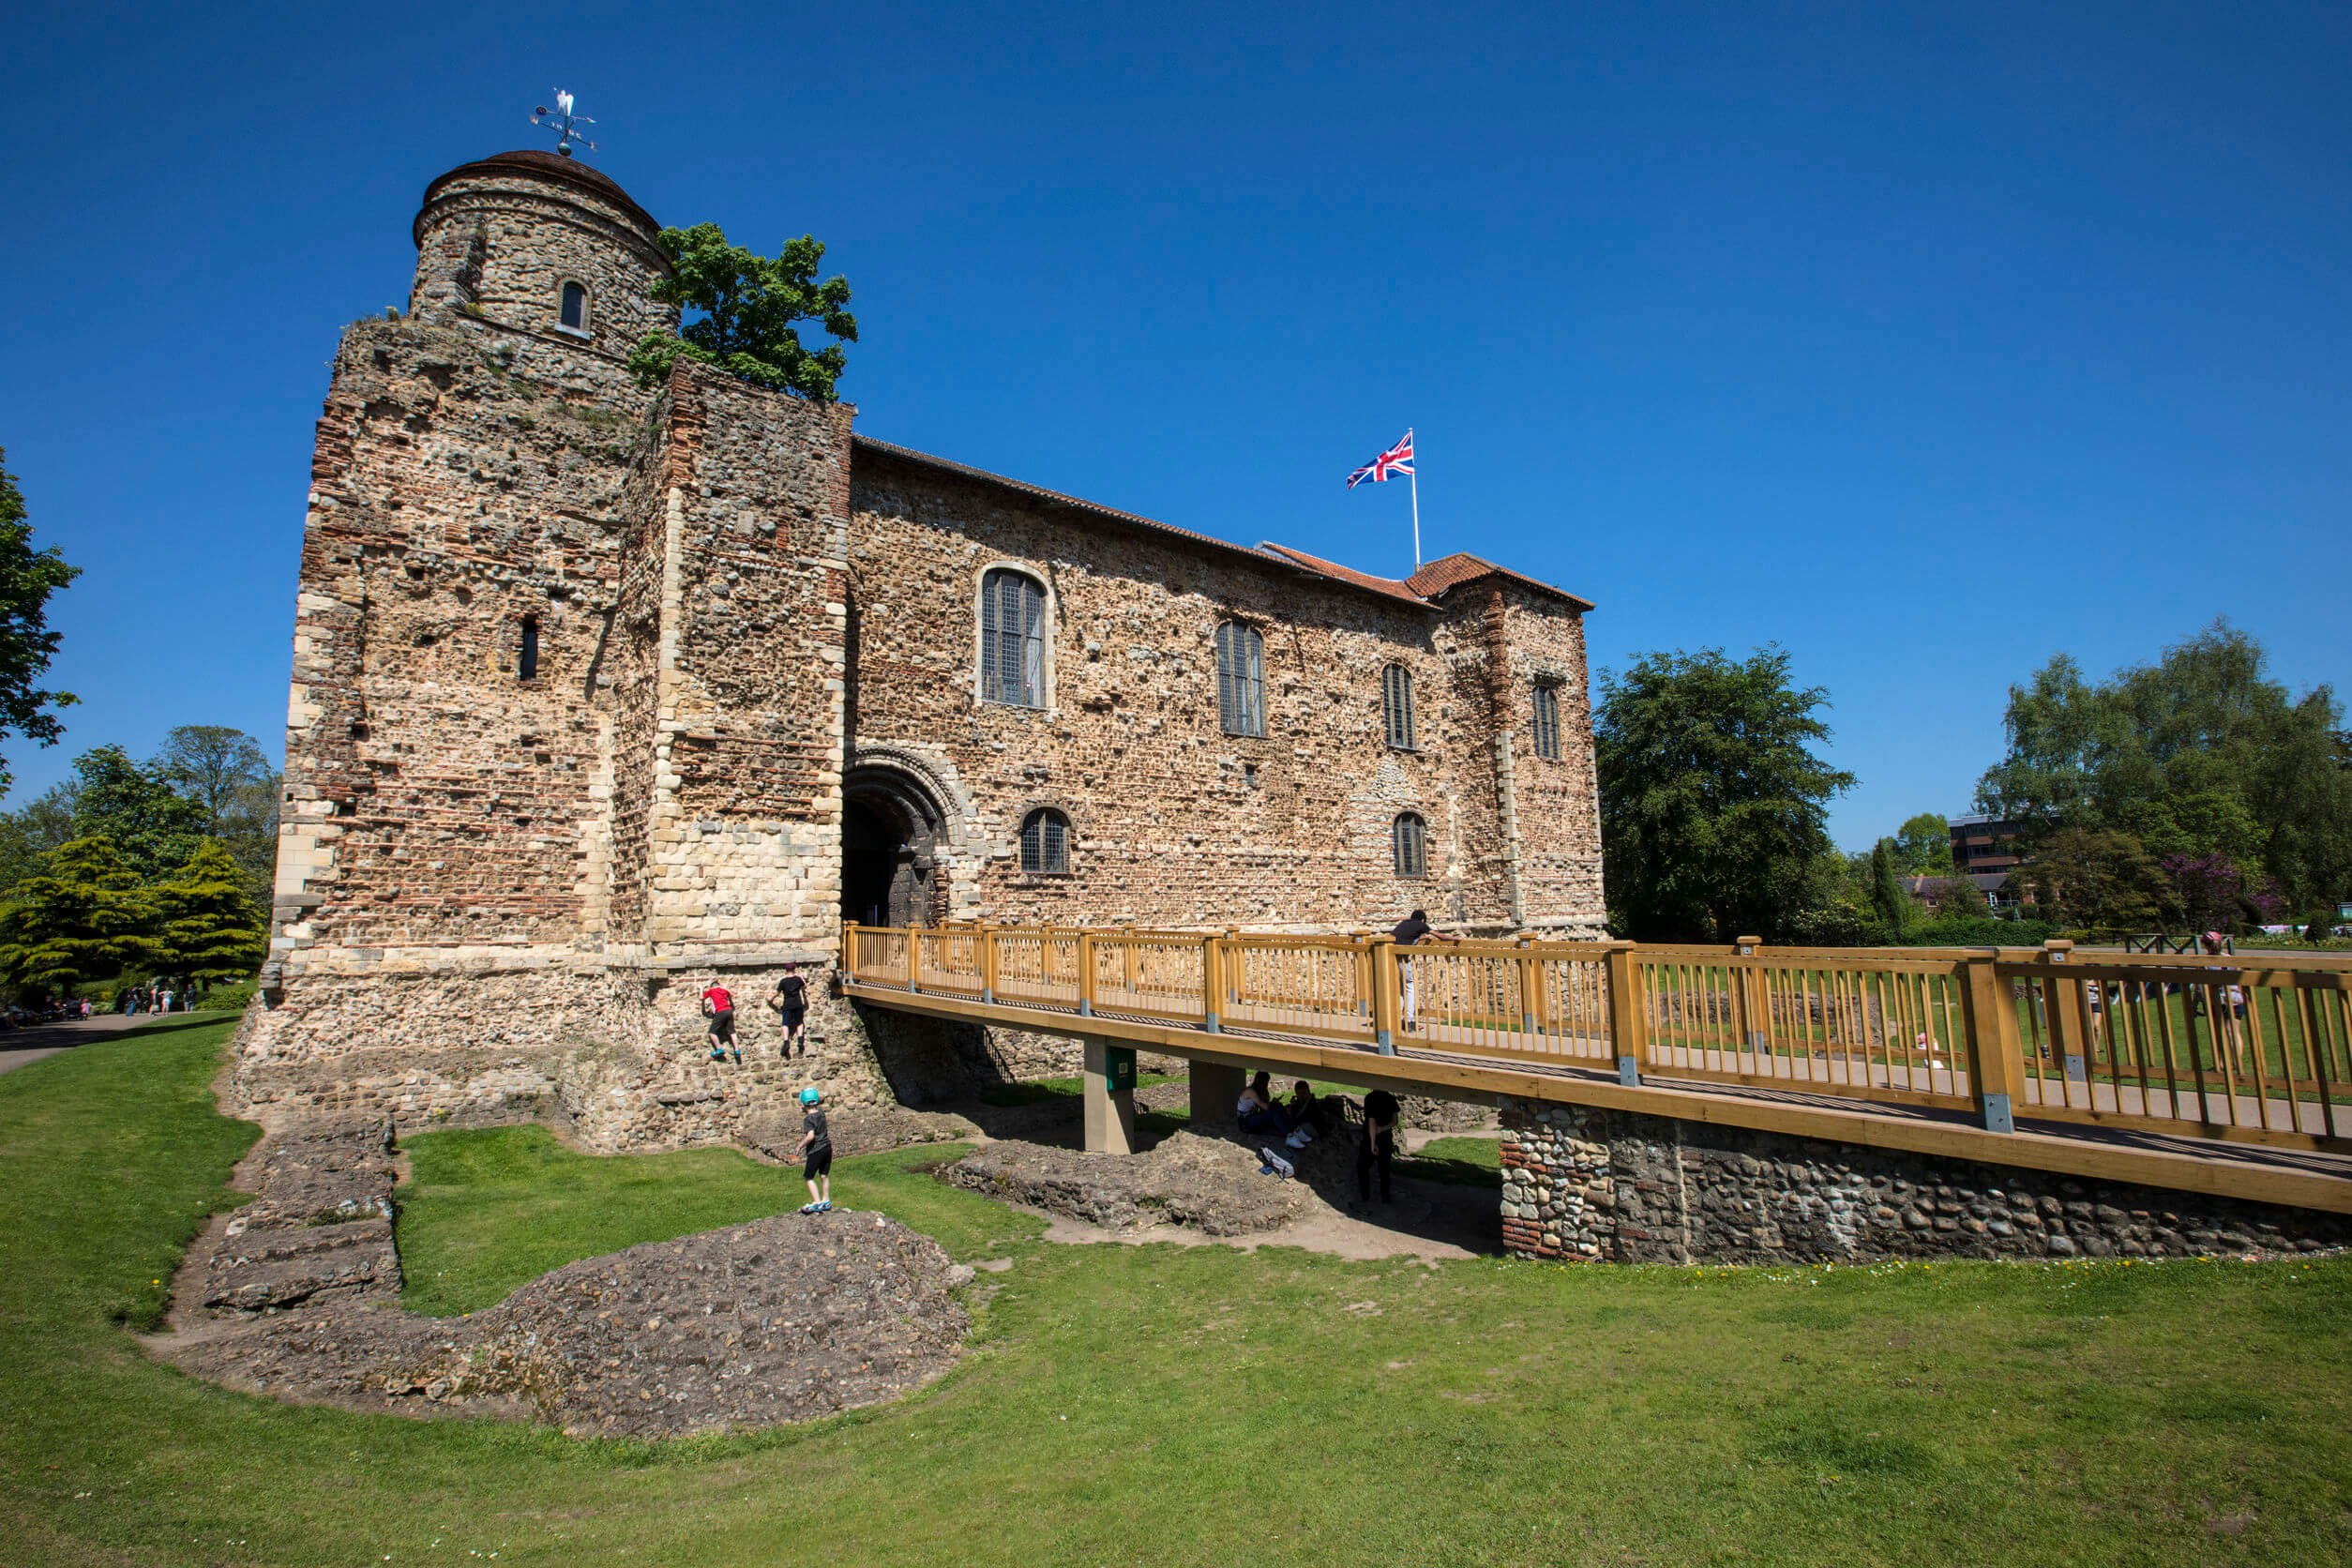 A view of the historic Colchester Castle, located in the market town of Colchester in Essex, UK.